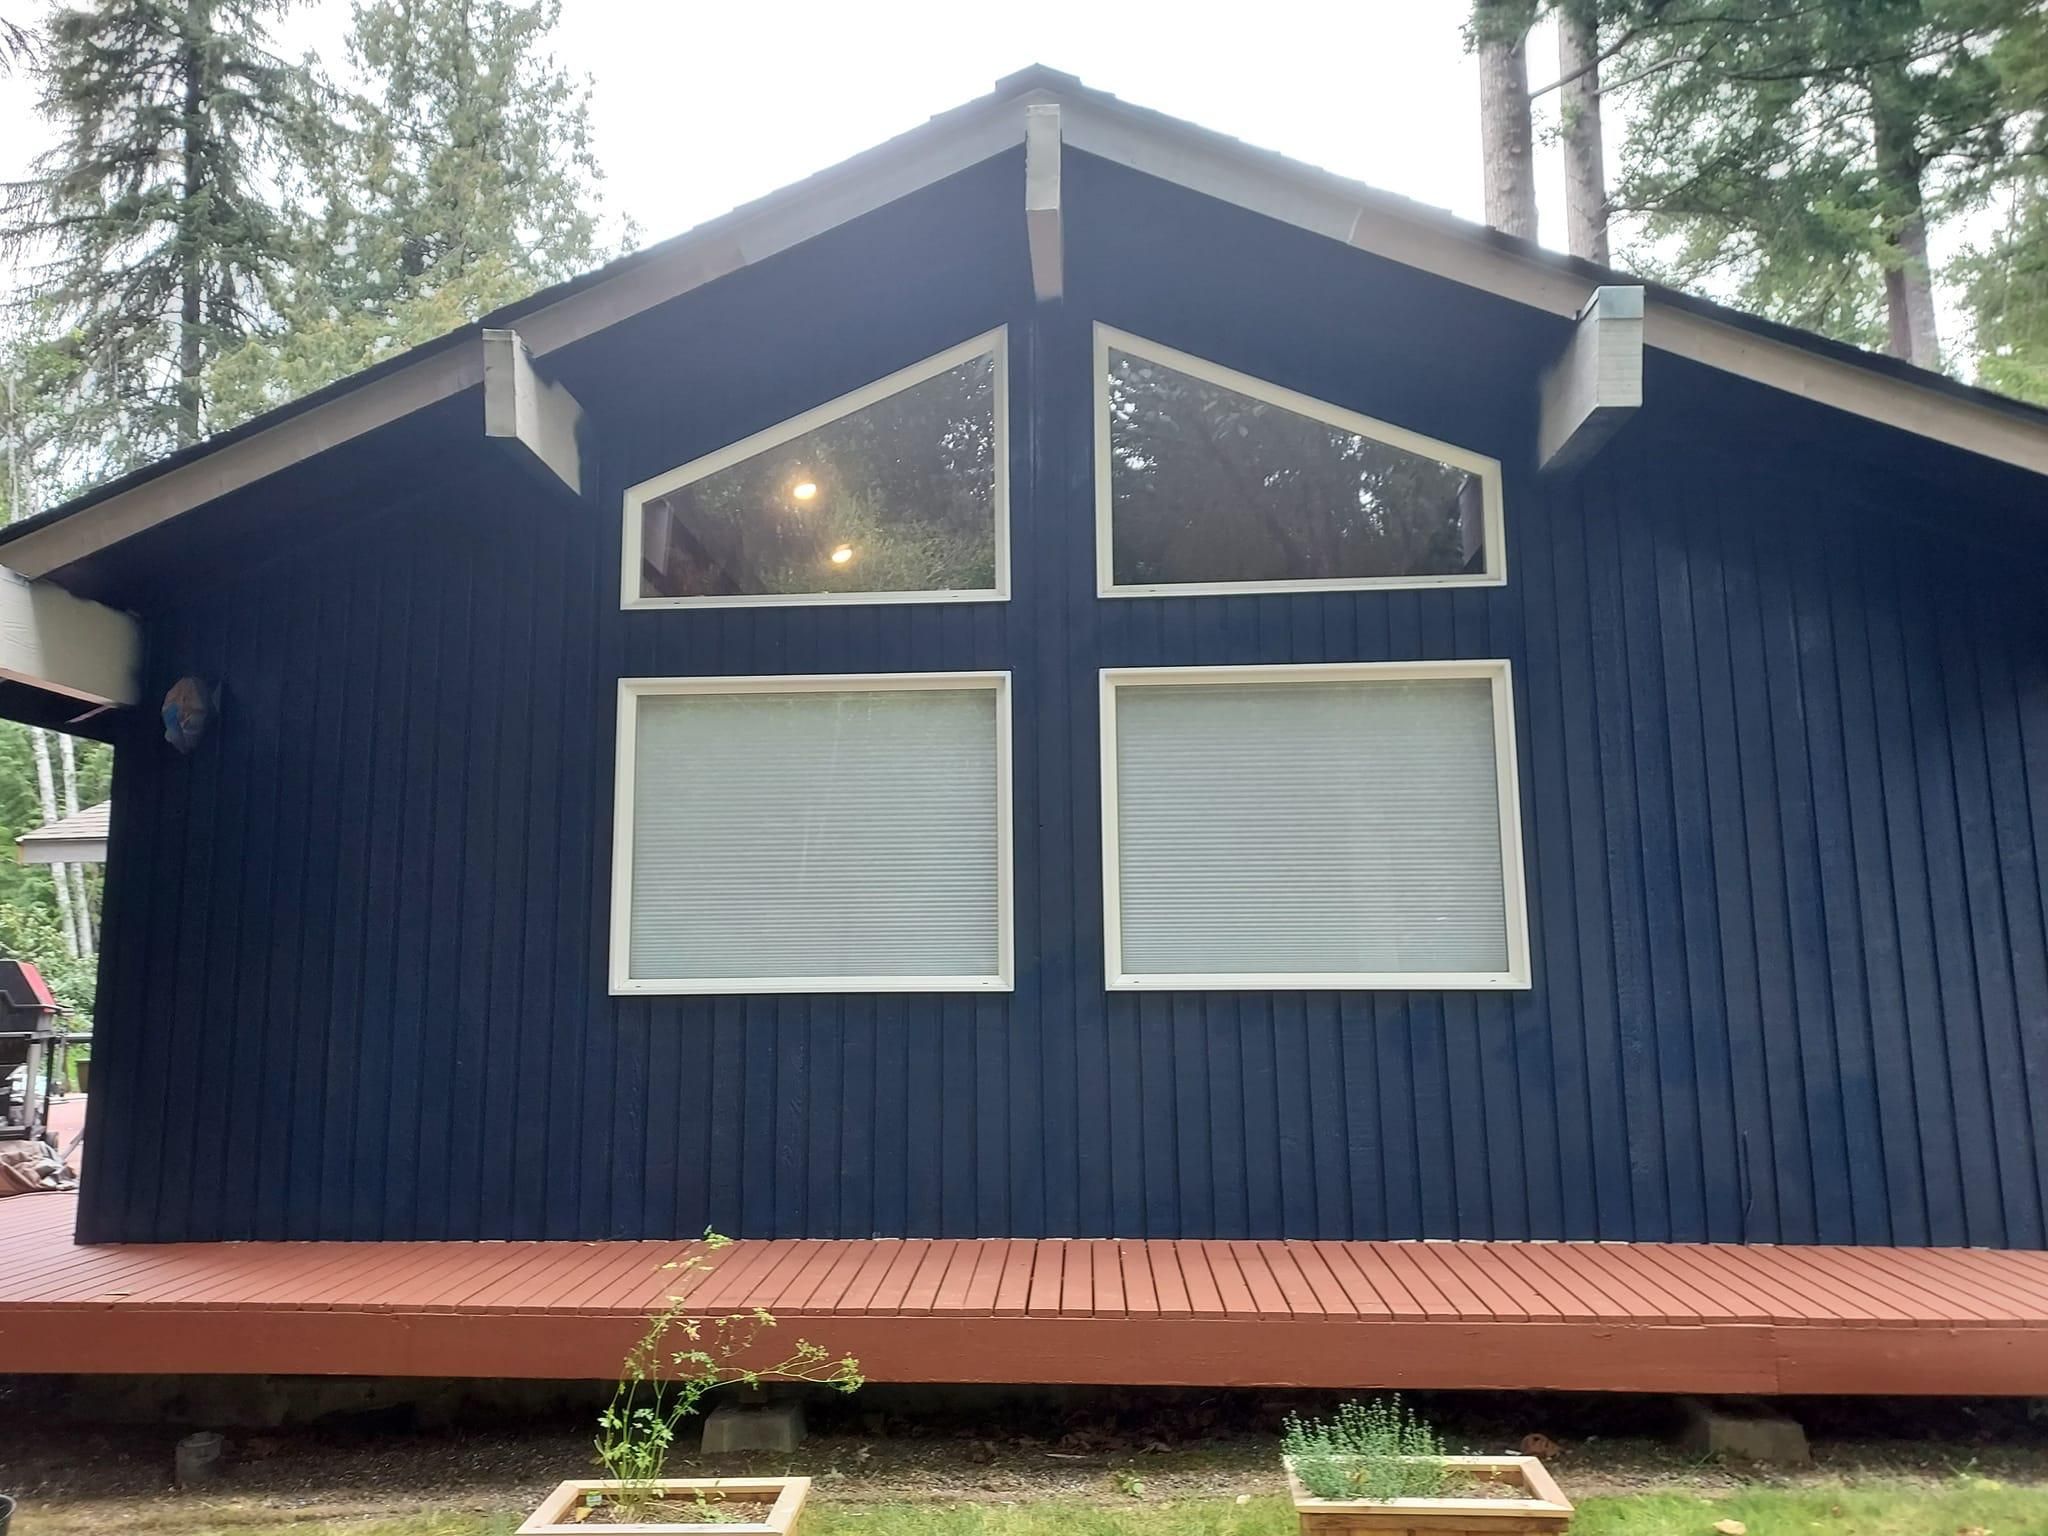 Exterior Painting for Perben Painting and Landscape LLC in Mount Vernon, WA